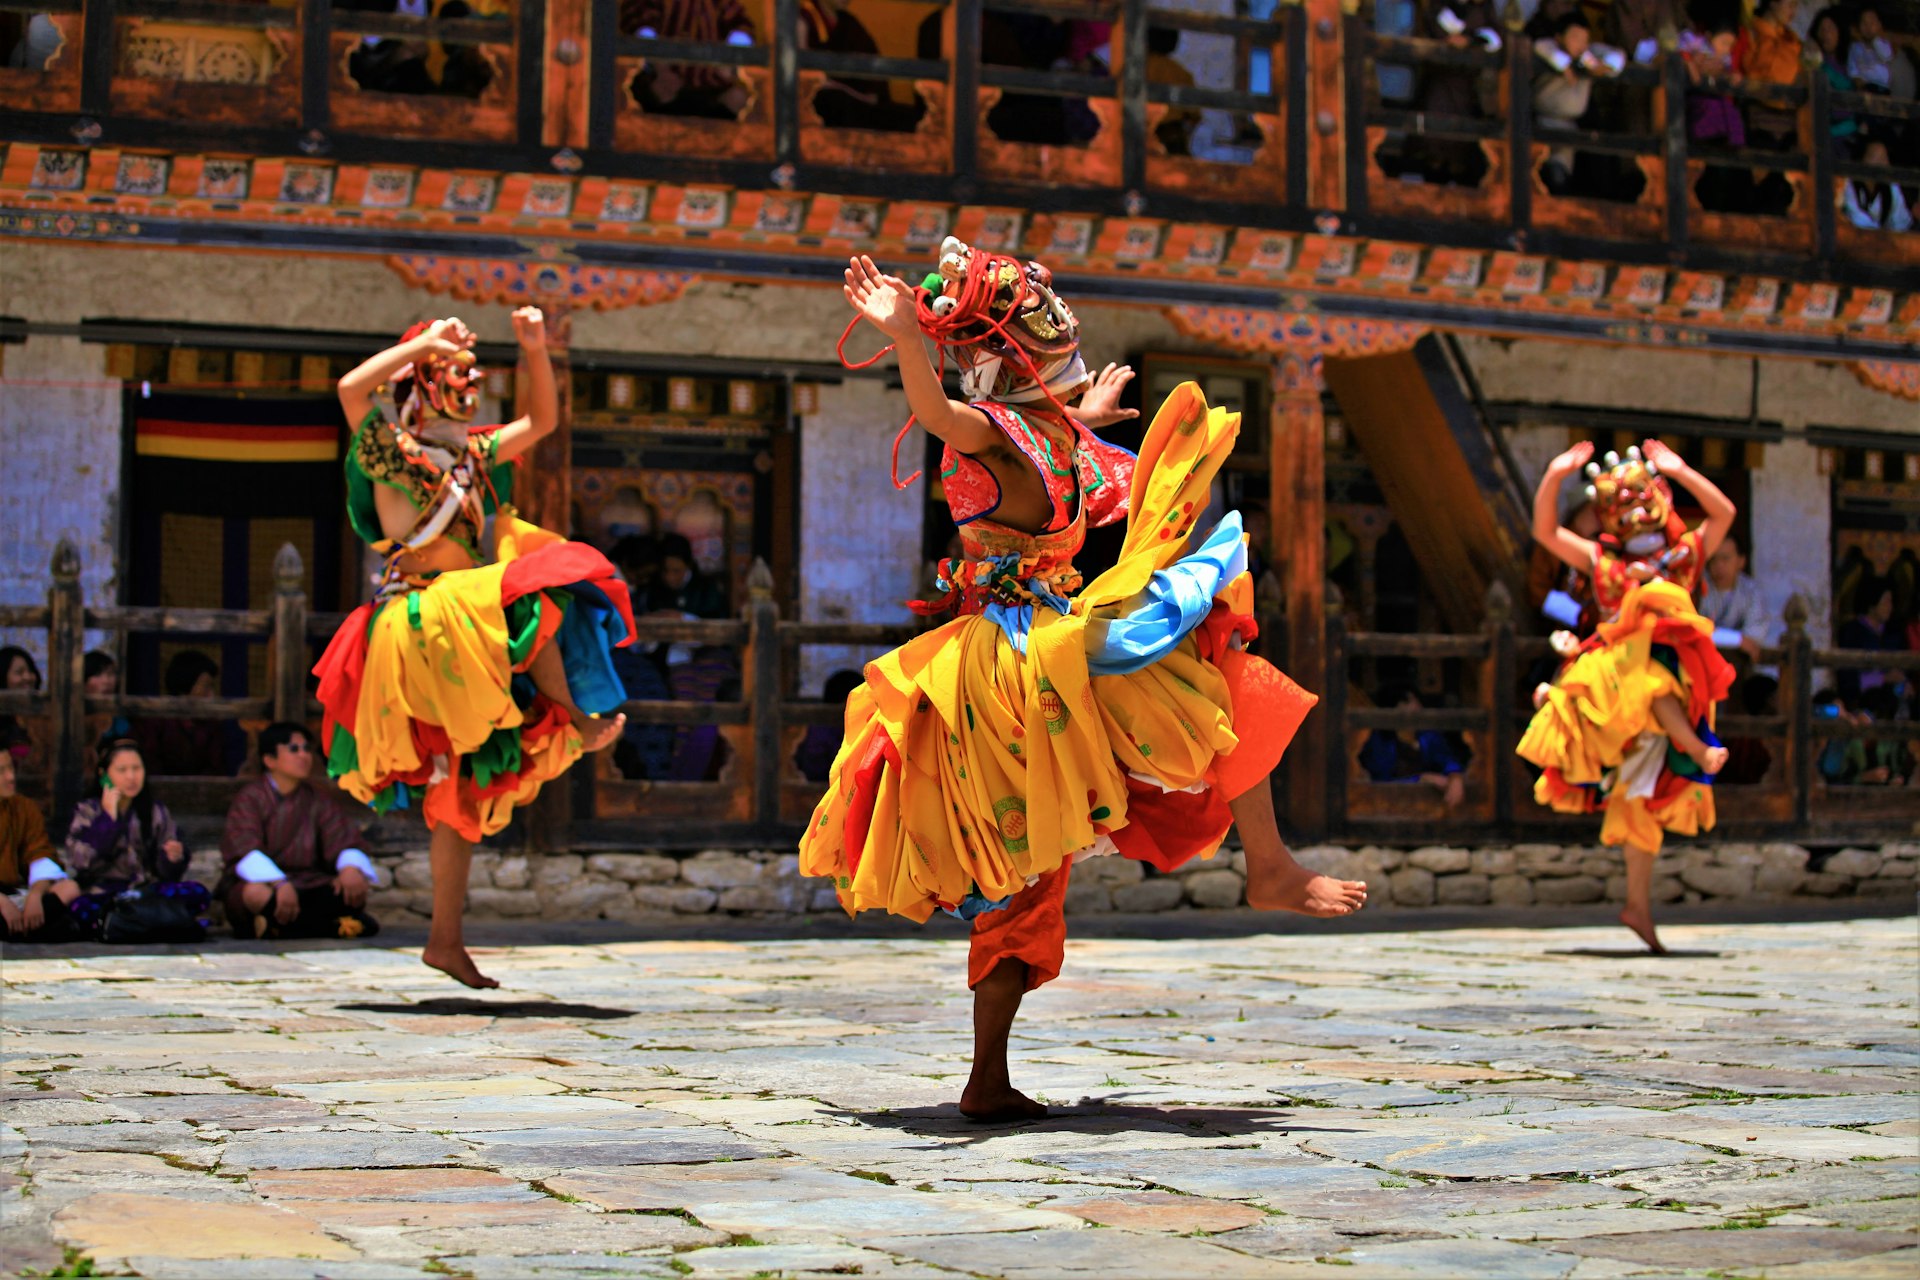 People dancing in colorful masks in a courtyard full of spectators